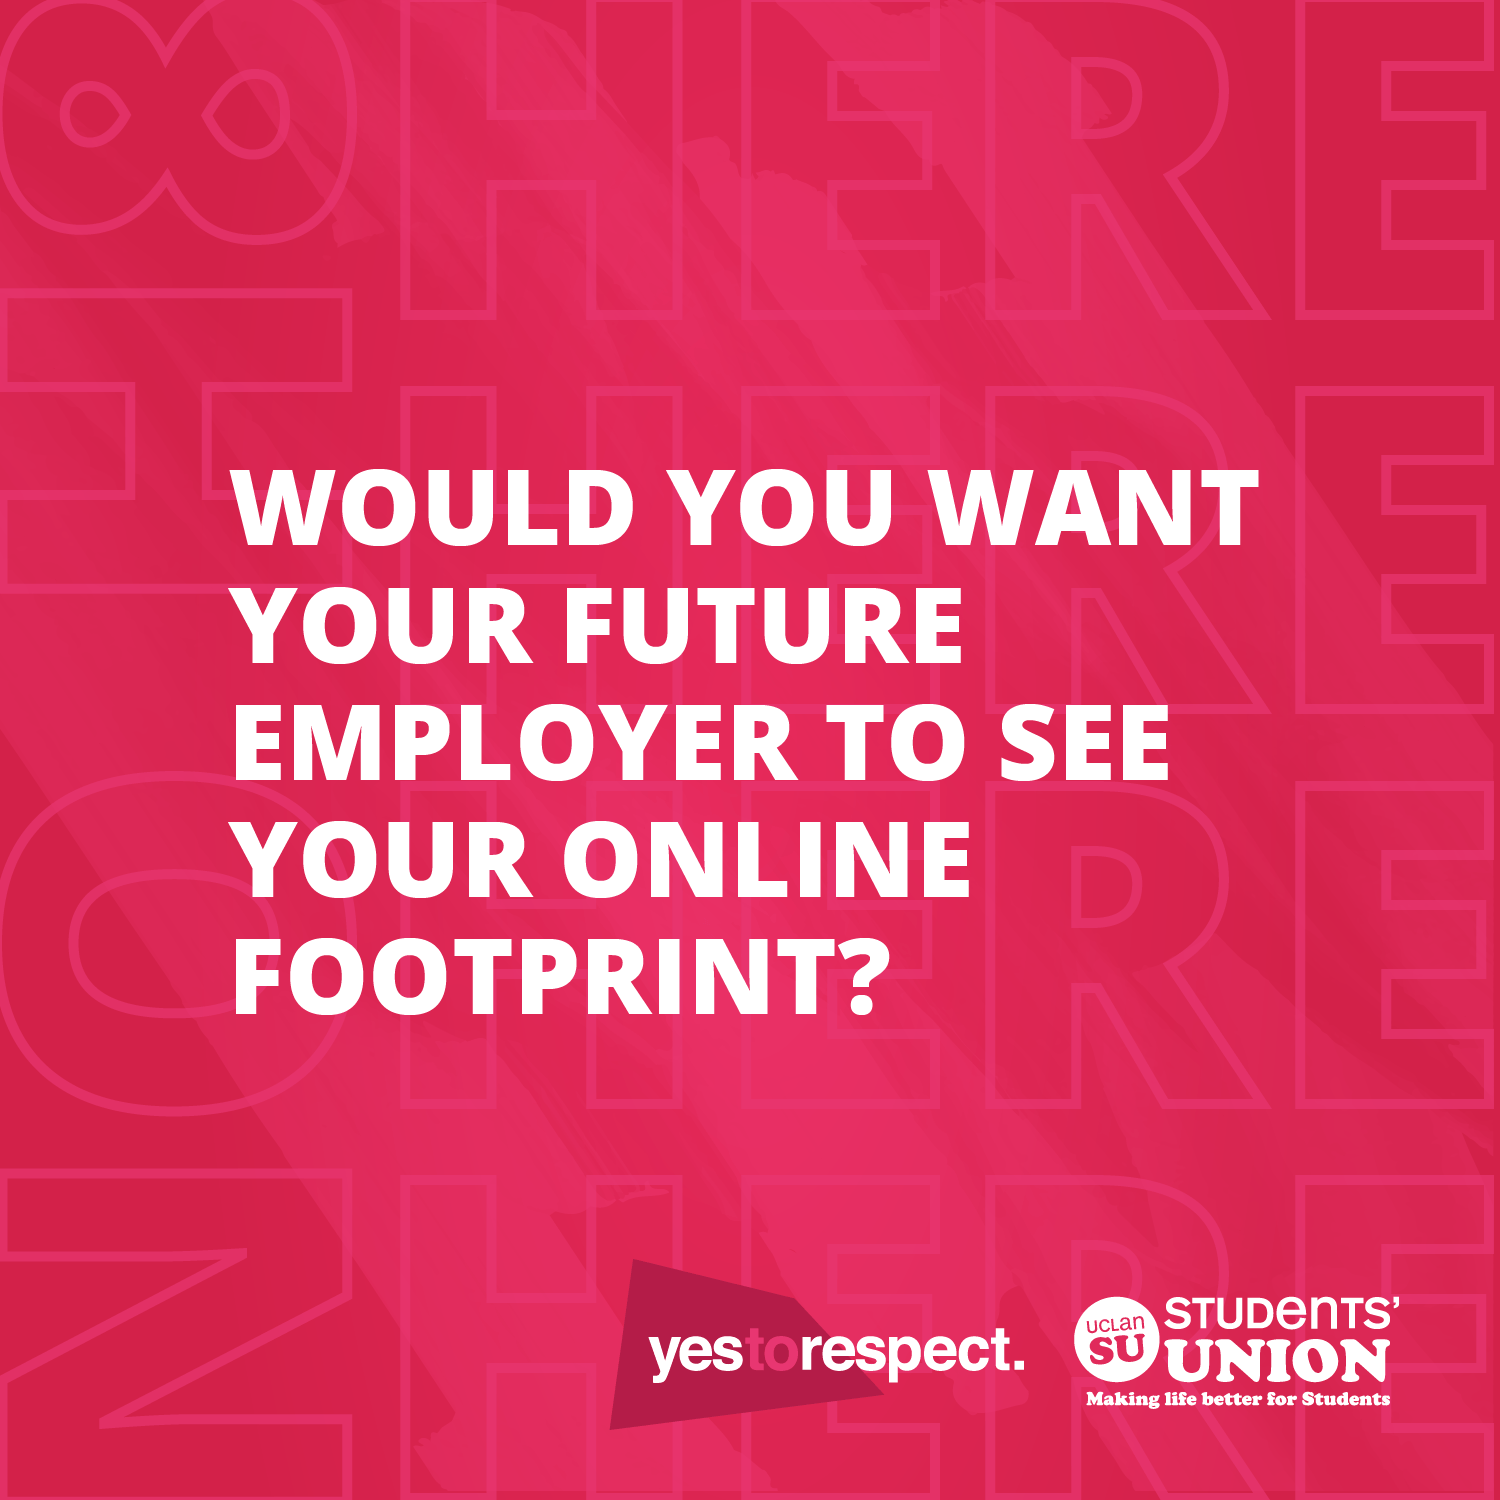 University of Central Lancashire - would you want your future employer to see your online footprint?